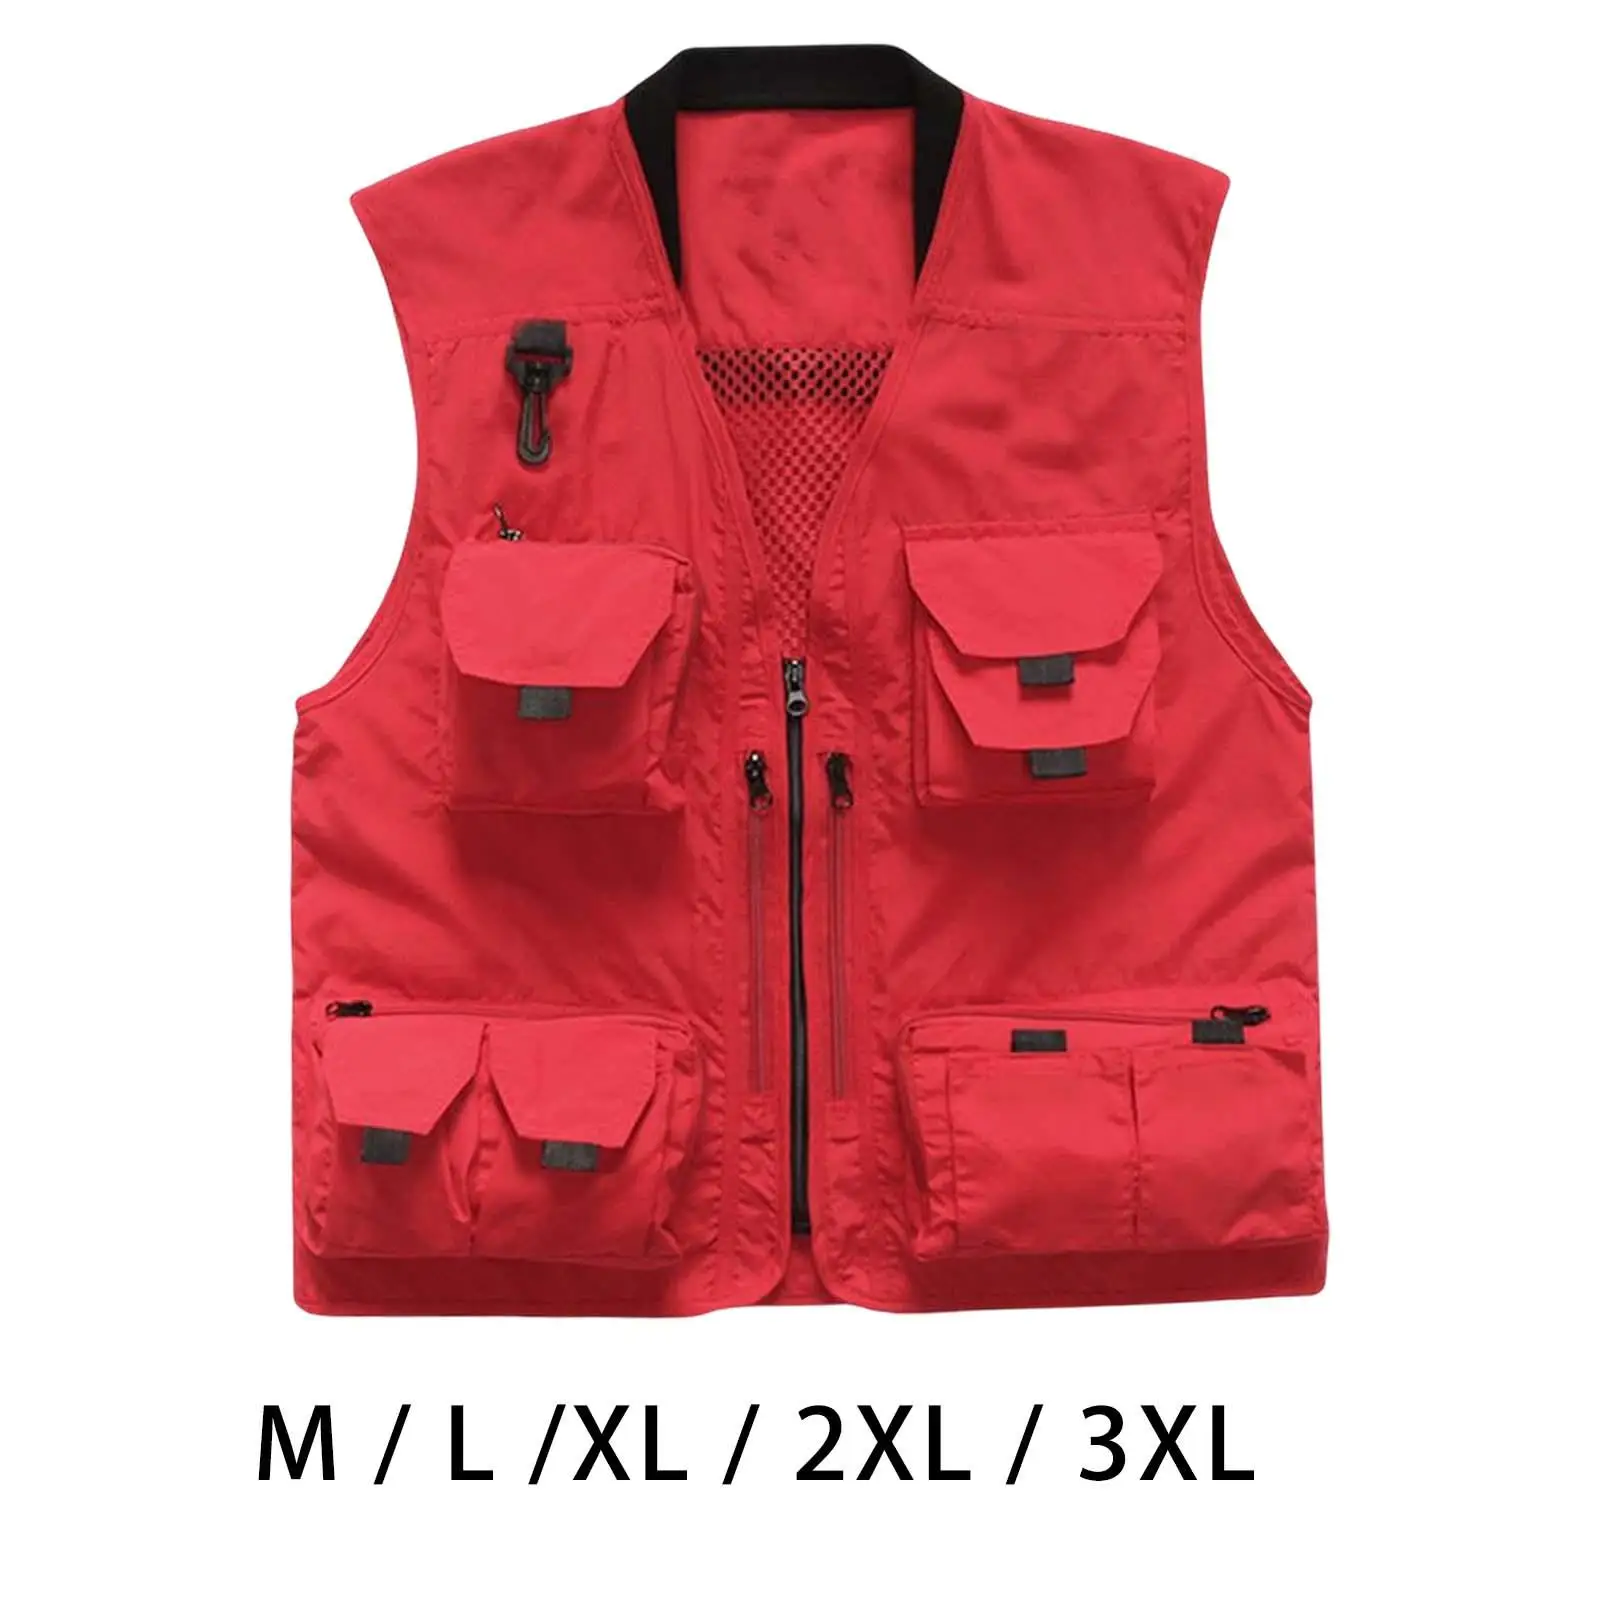 Men Fishing Vest with Pockets Travel Outdoor Work Hiking Costume Mesh Casual